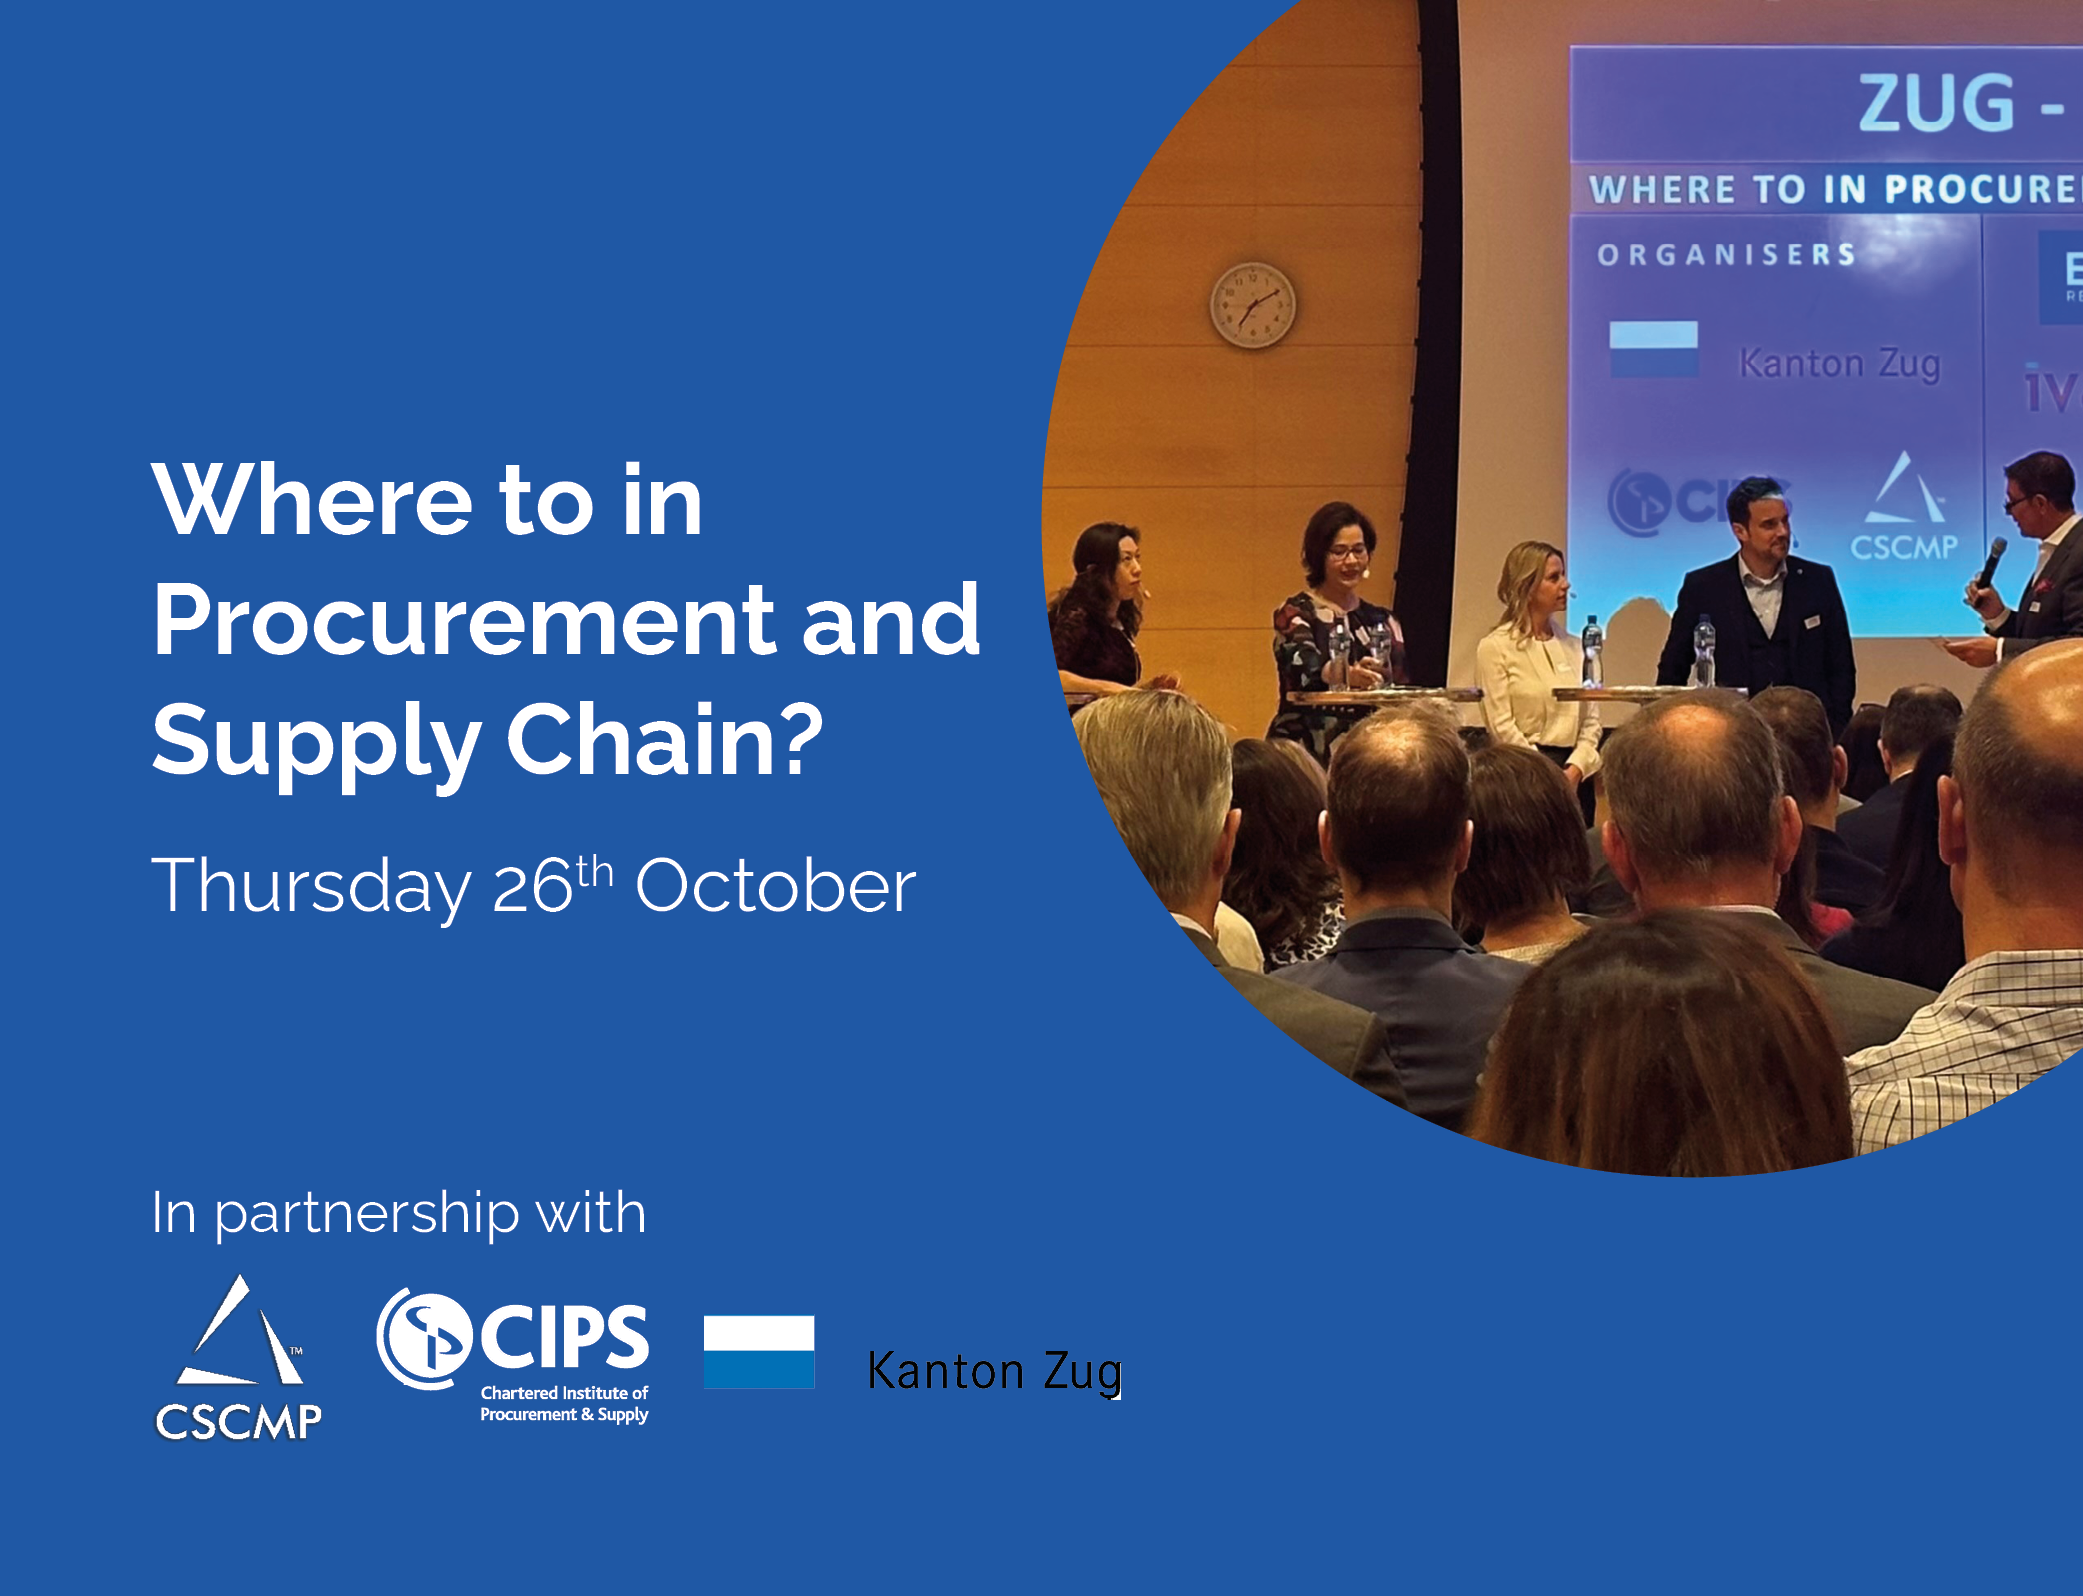 Where to in Procurement and Supply Chain?